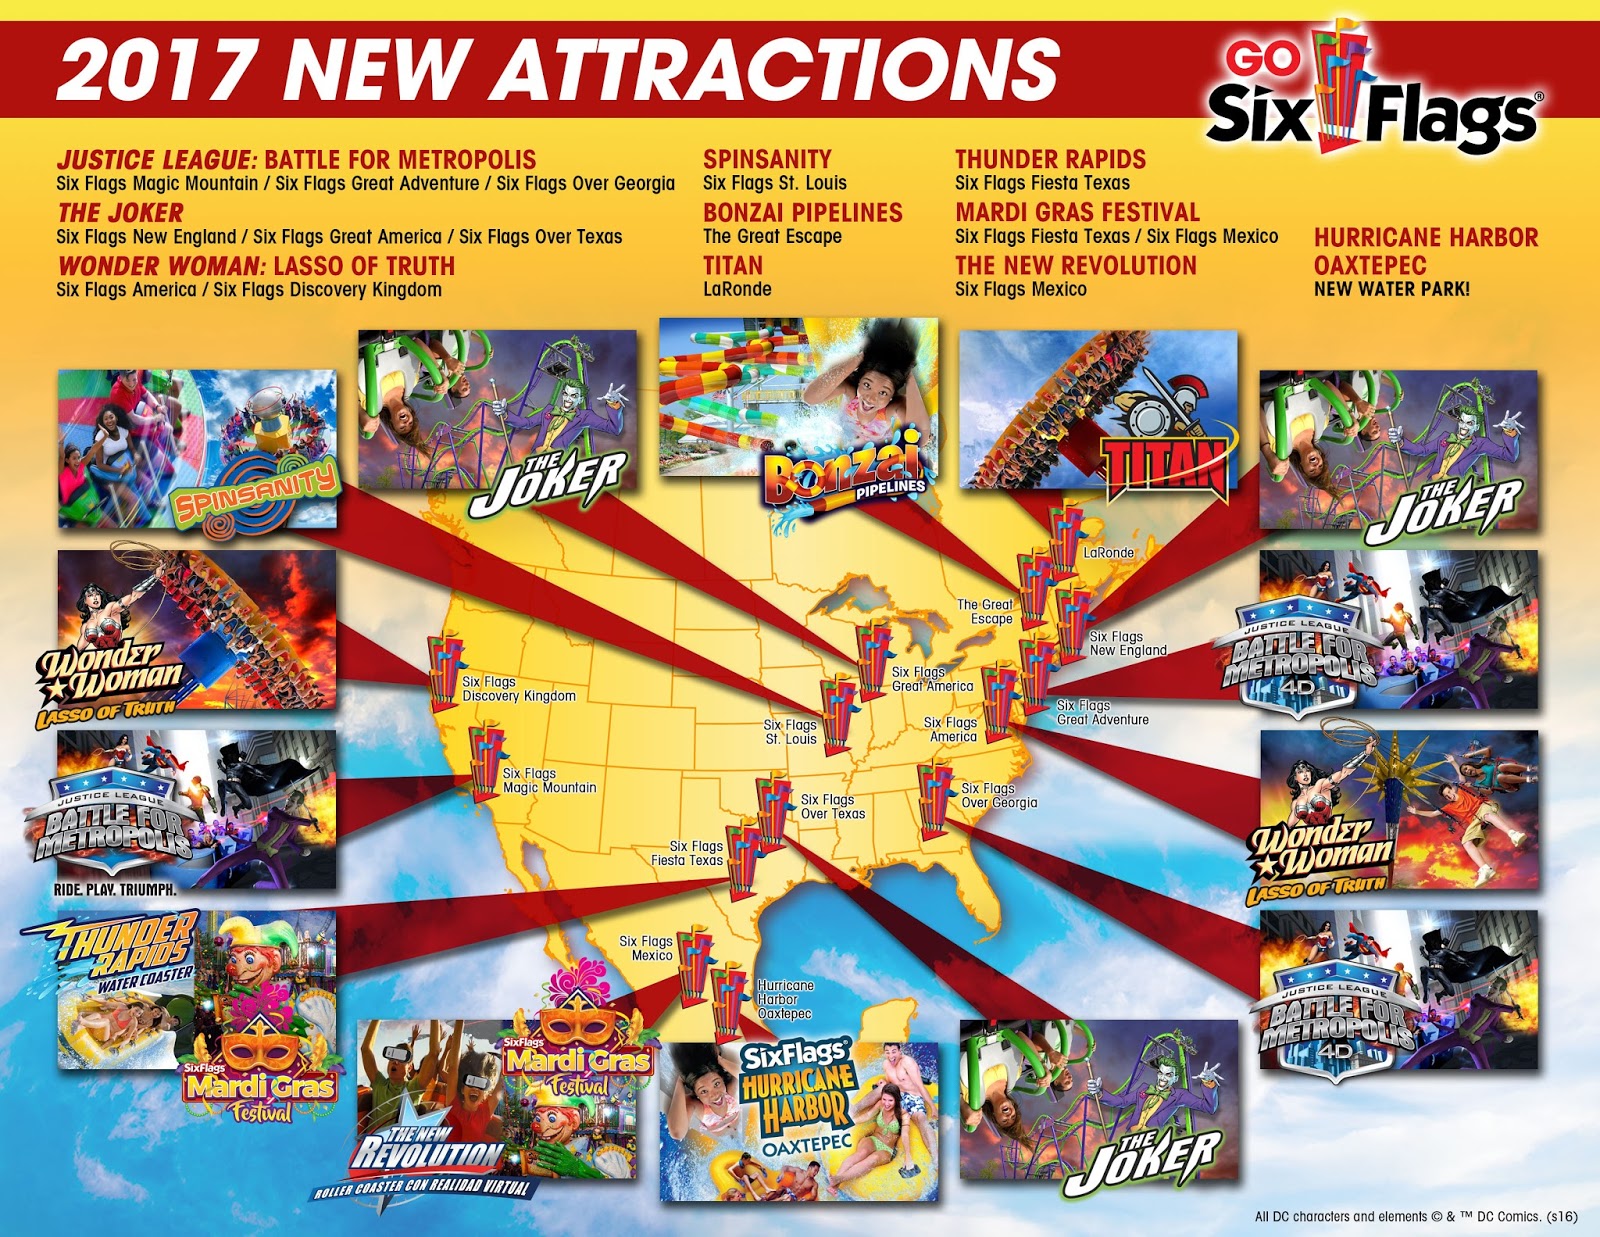 Six Flags Parks 2017 New Attractions Confirmed - EVERY New Ride